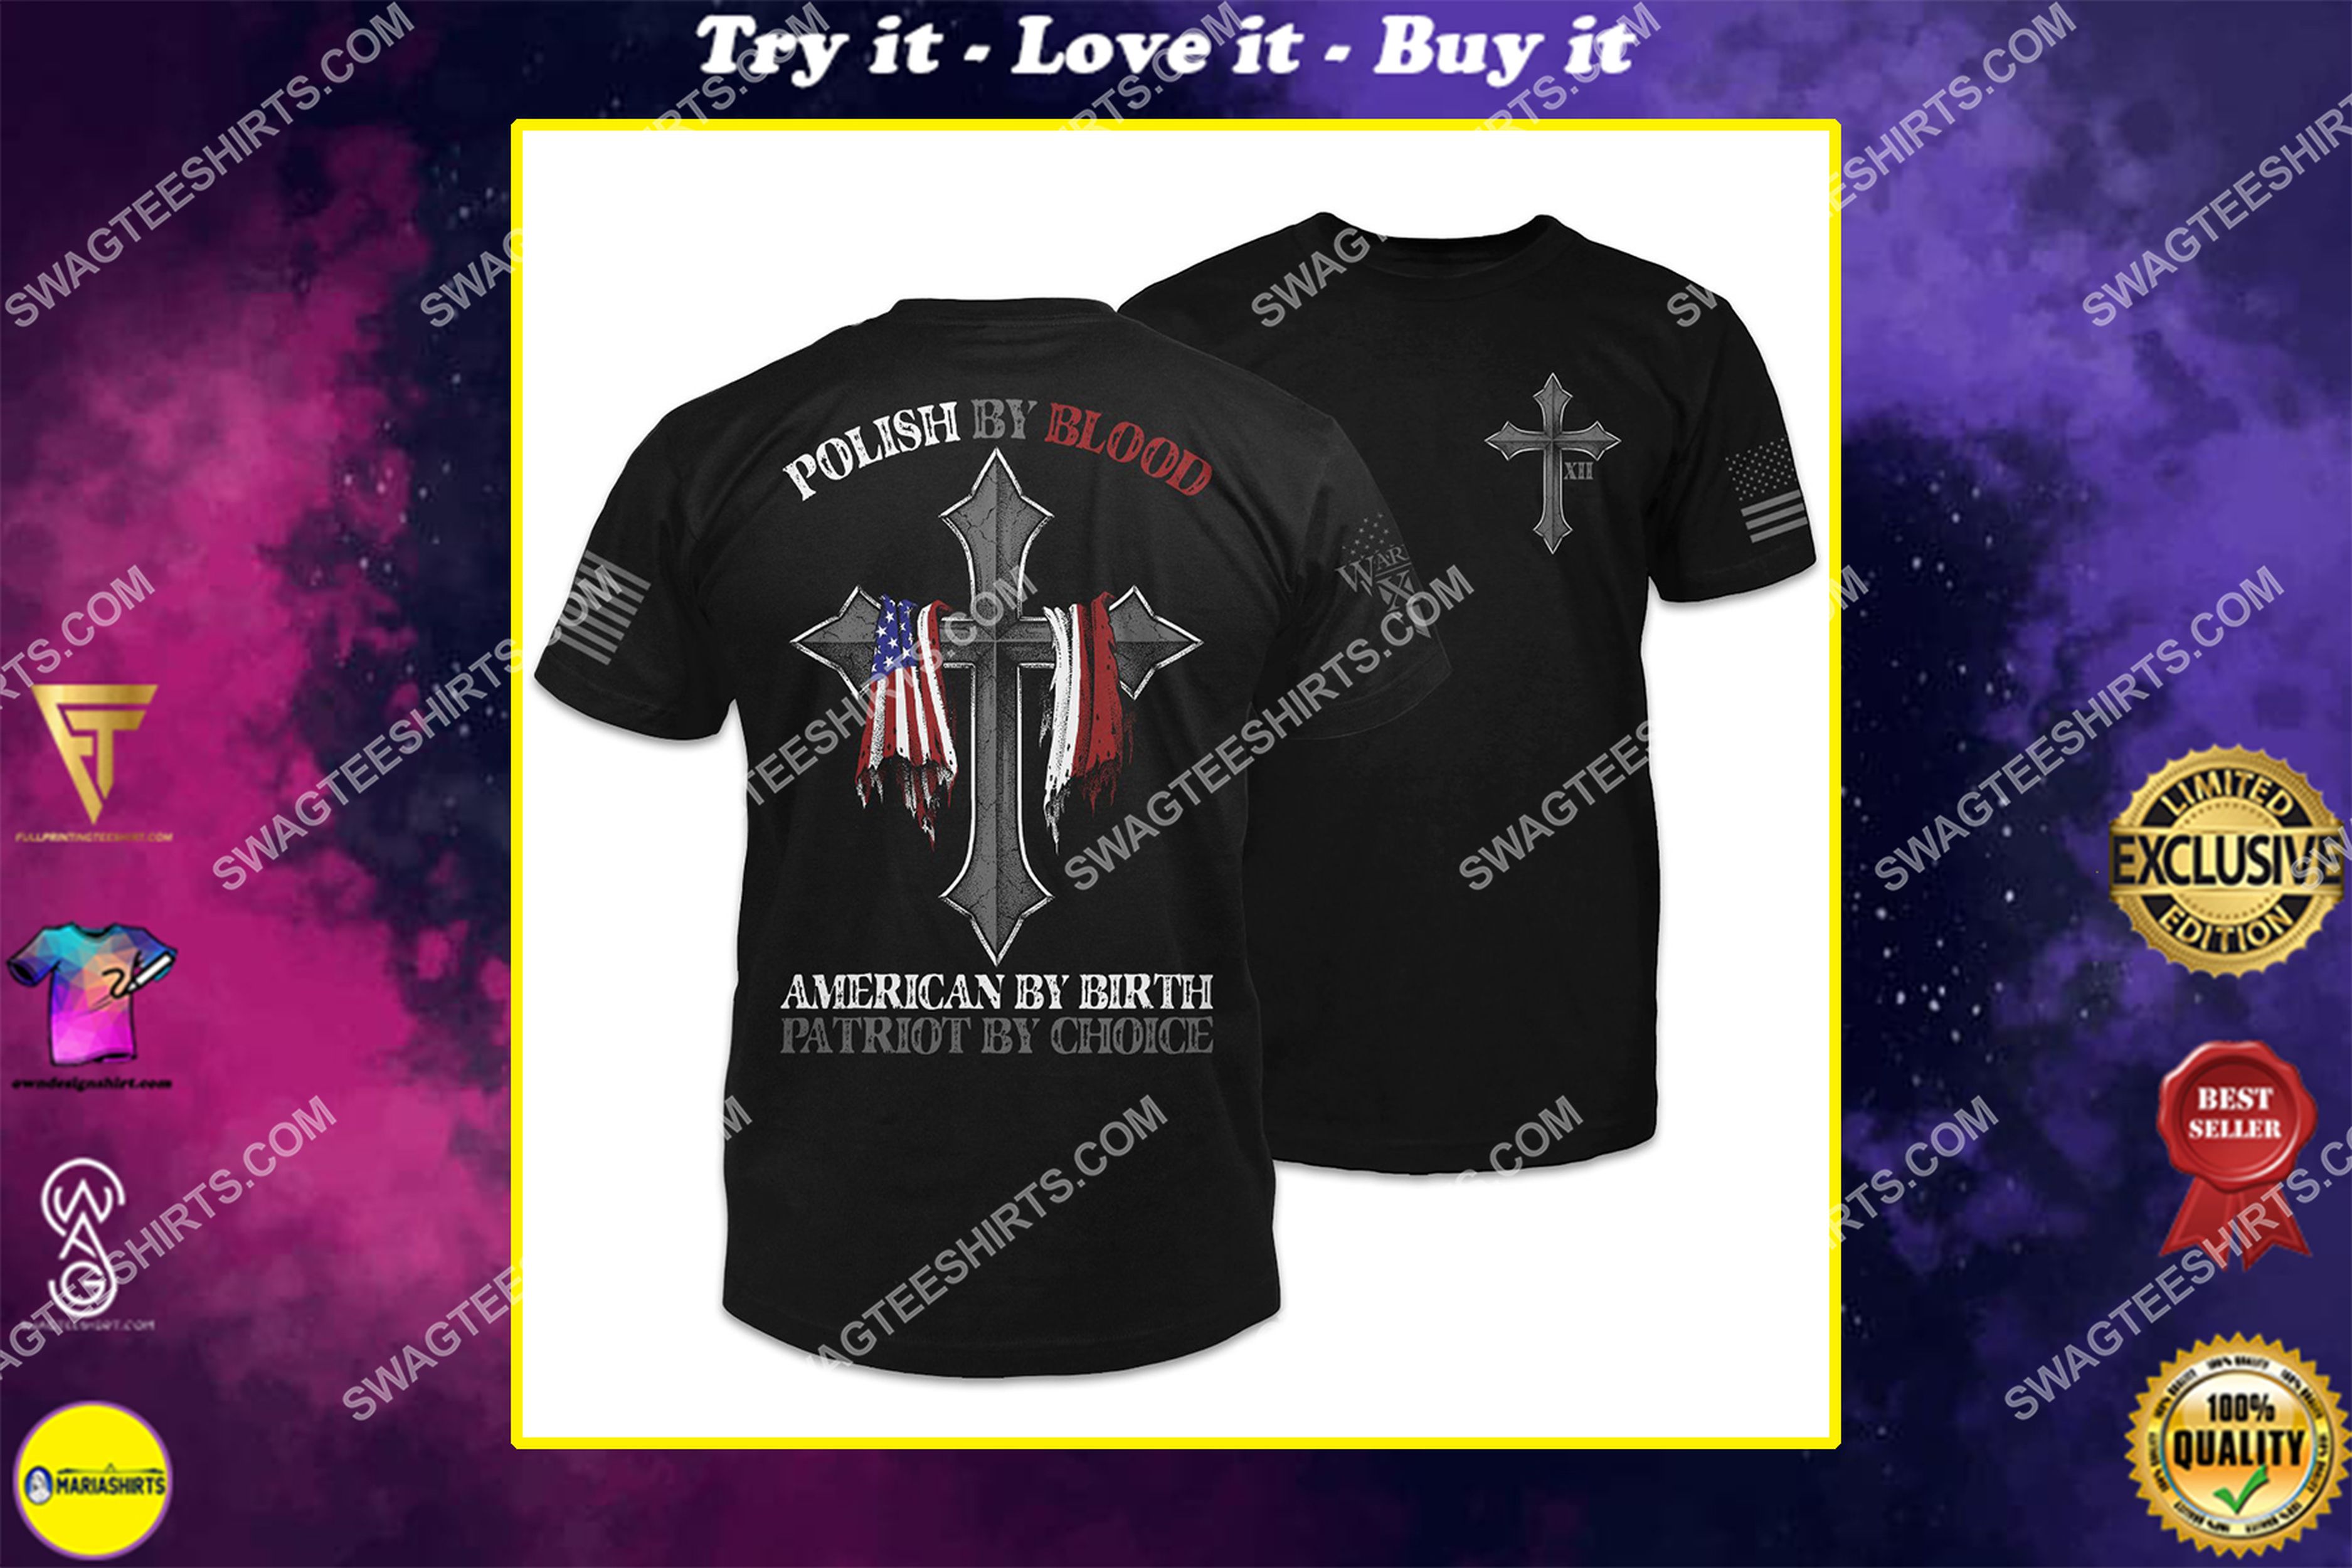 [special edition] polish by blood american by birth patriot by choice shirt – maria